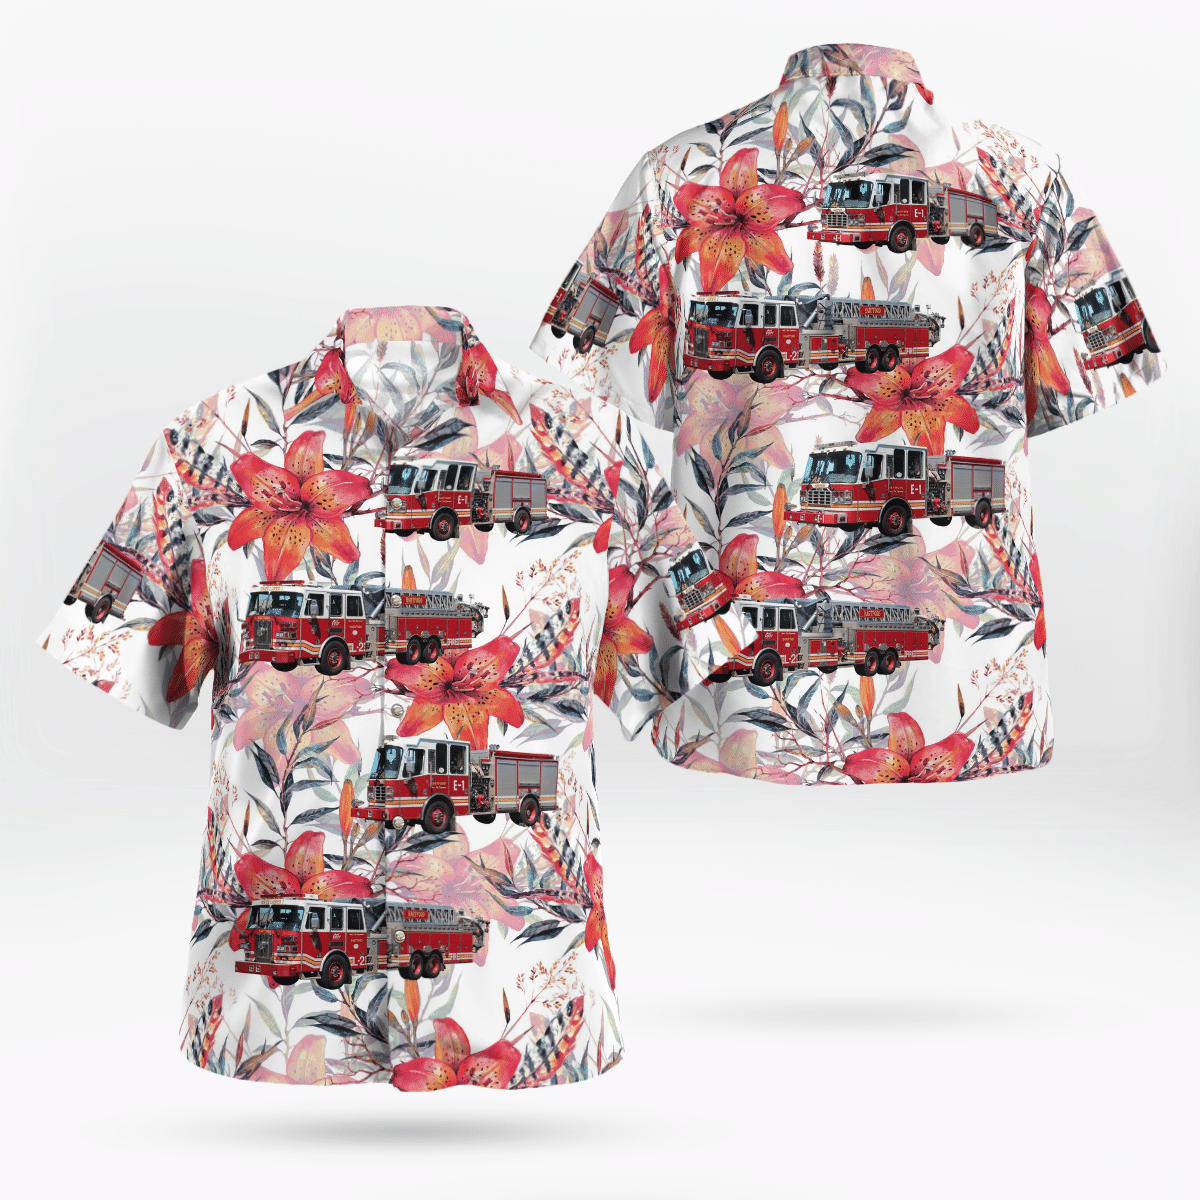 If you are in need of a new summertime look, pick up this Hawaiian shirt 151